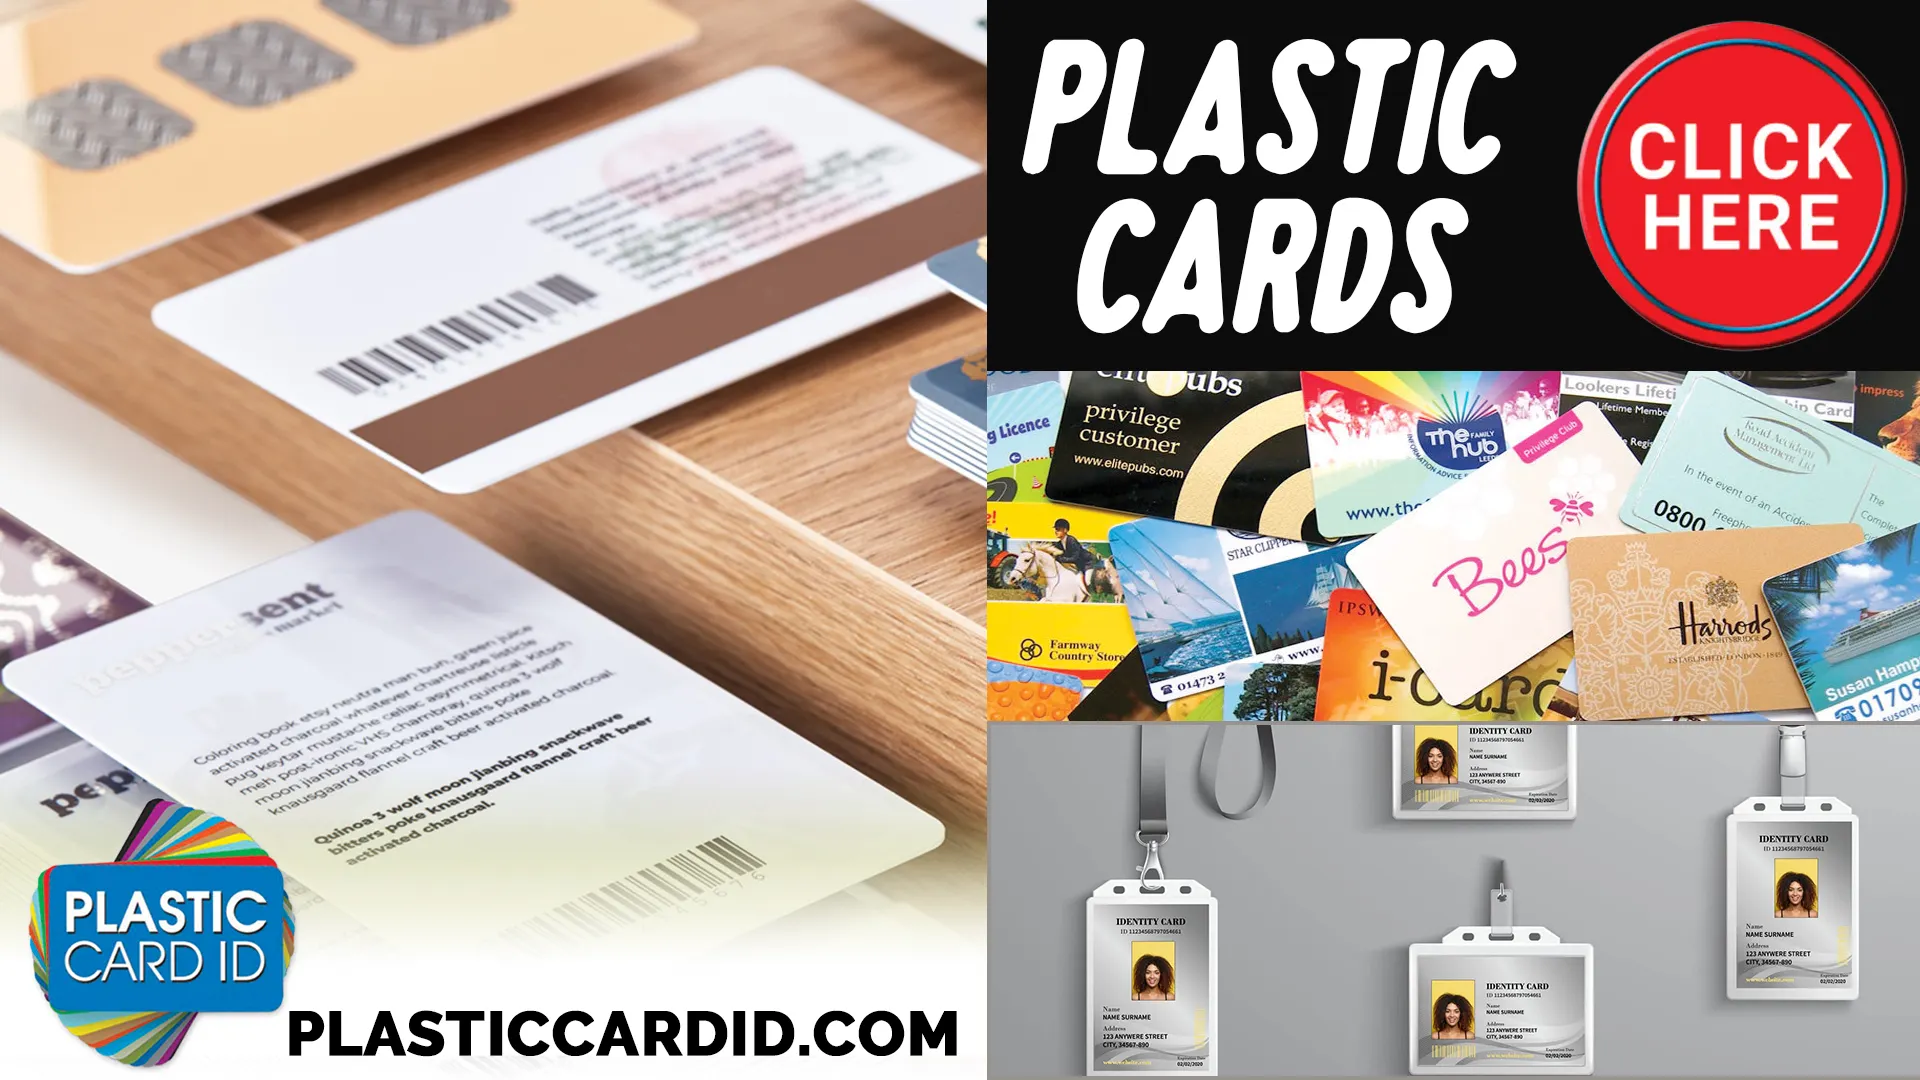 Why Choose Magnetic Stripe Cards for Your Business or Organization?